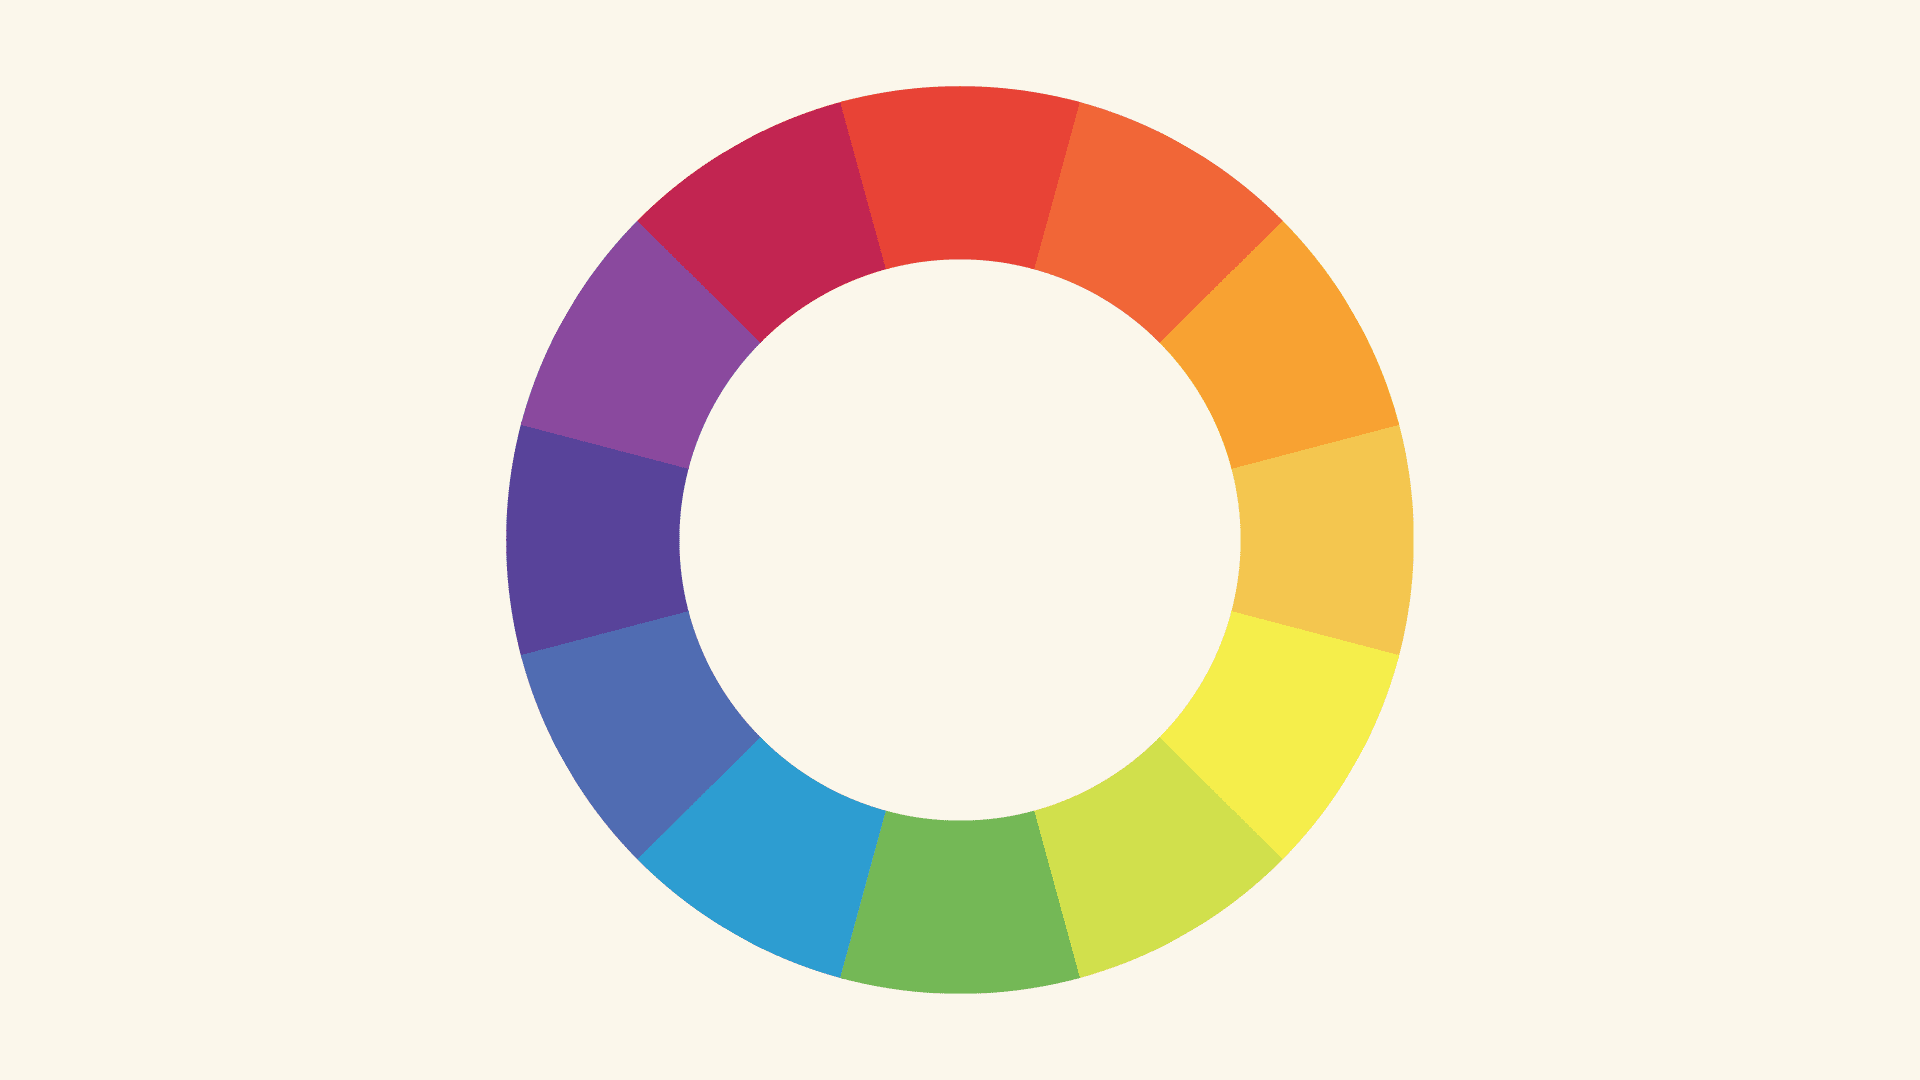 A color wheel displaying the basic colors.